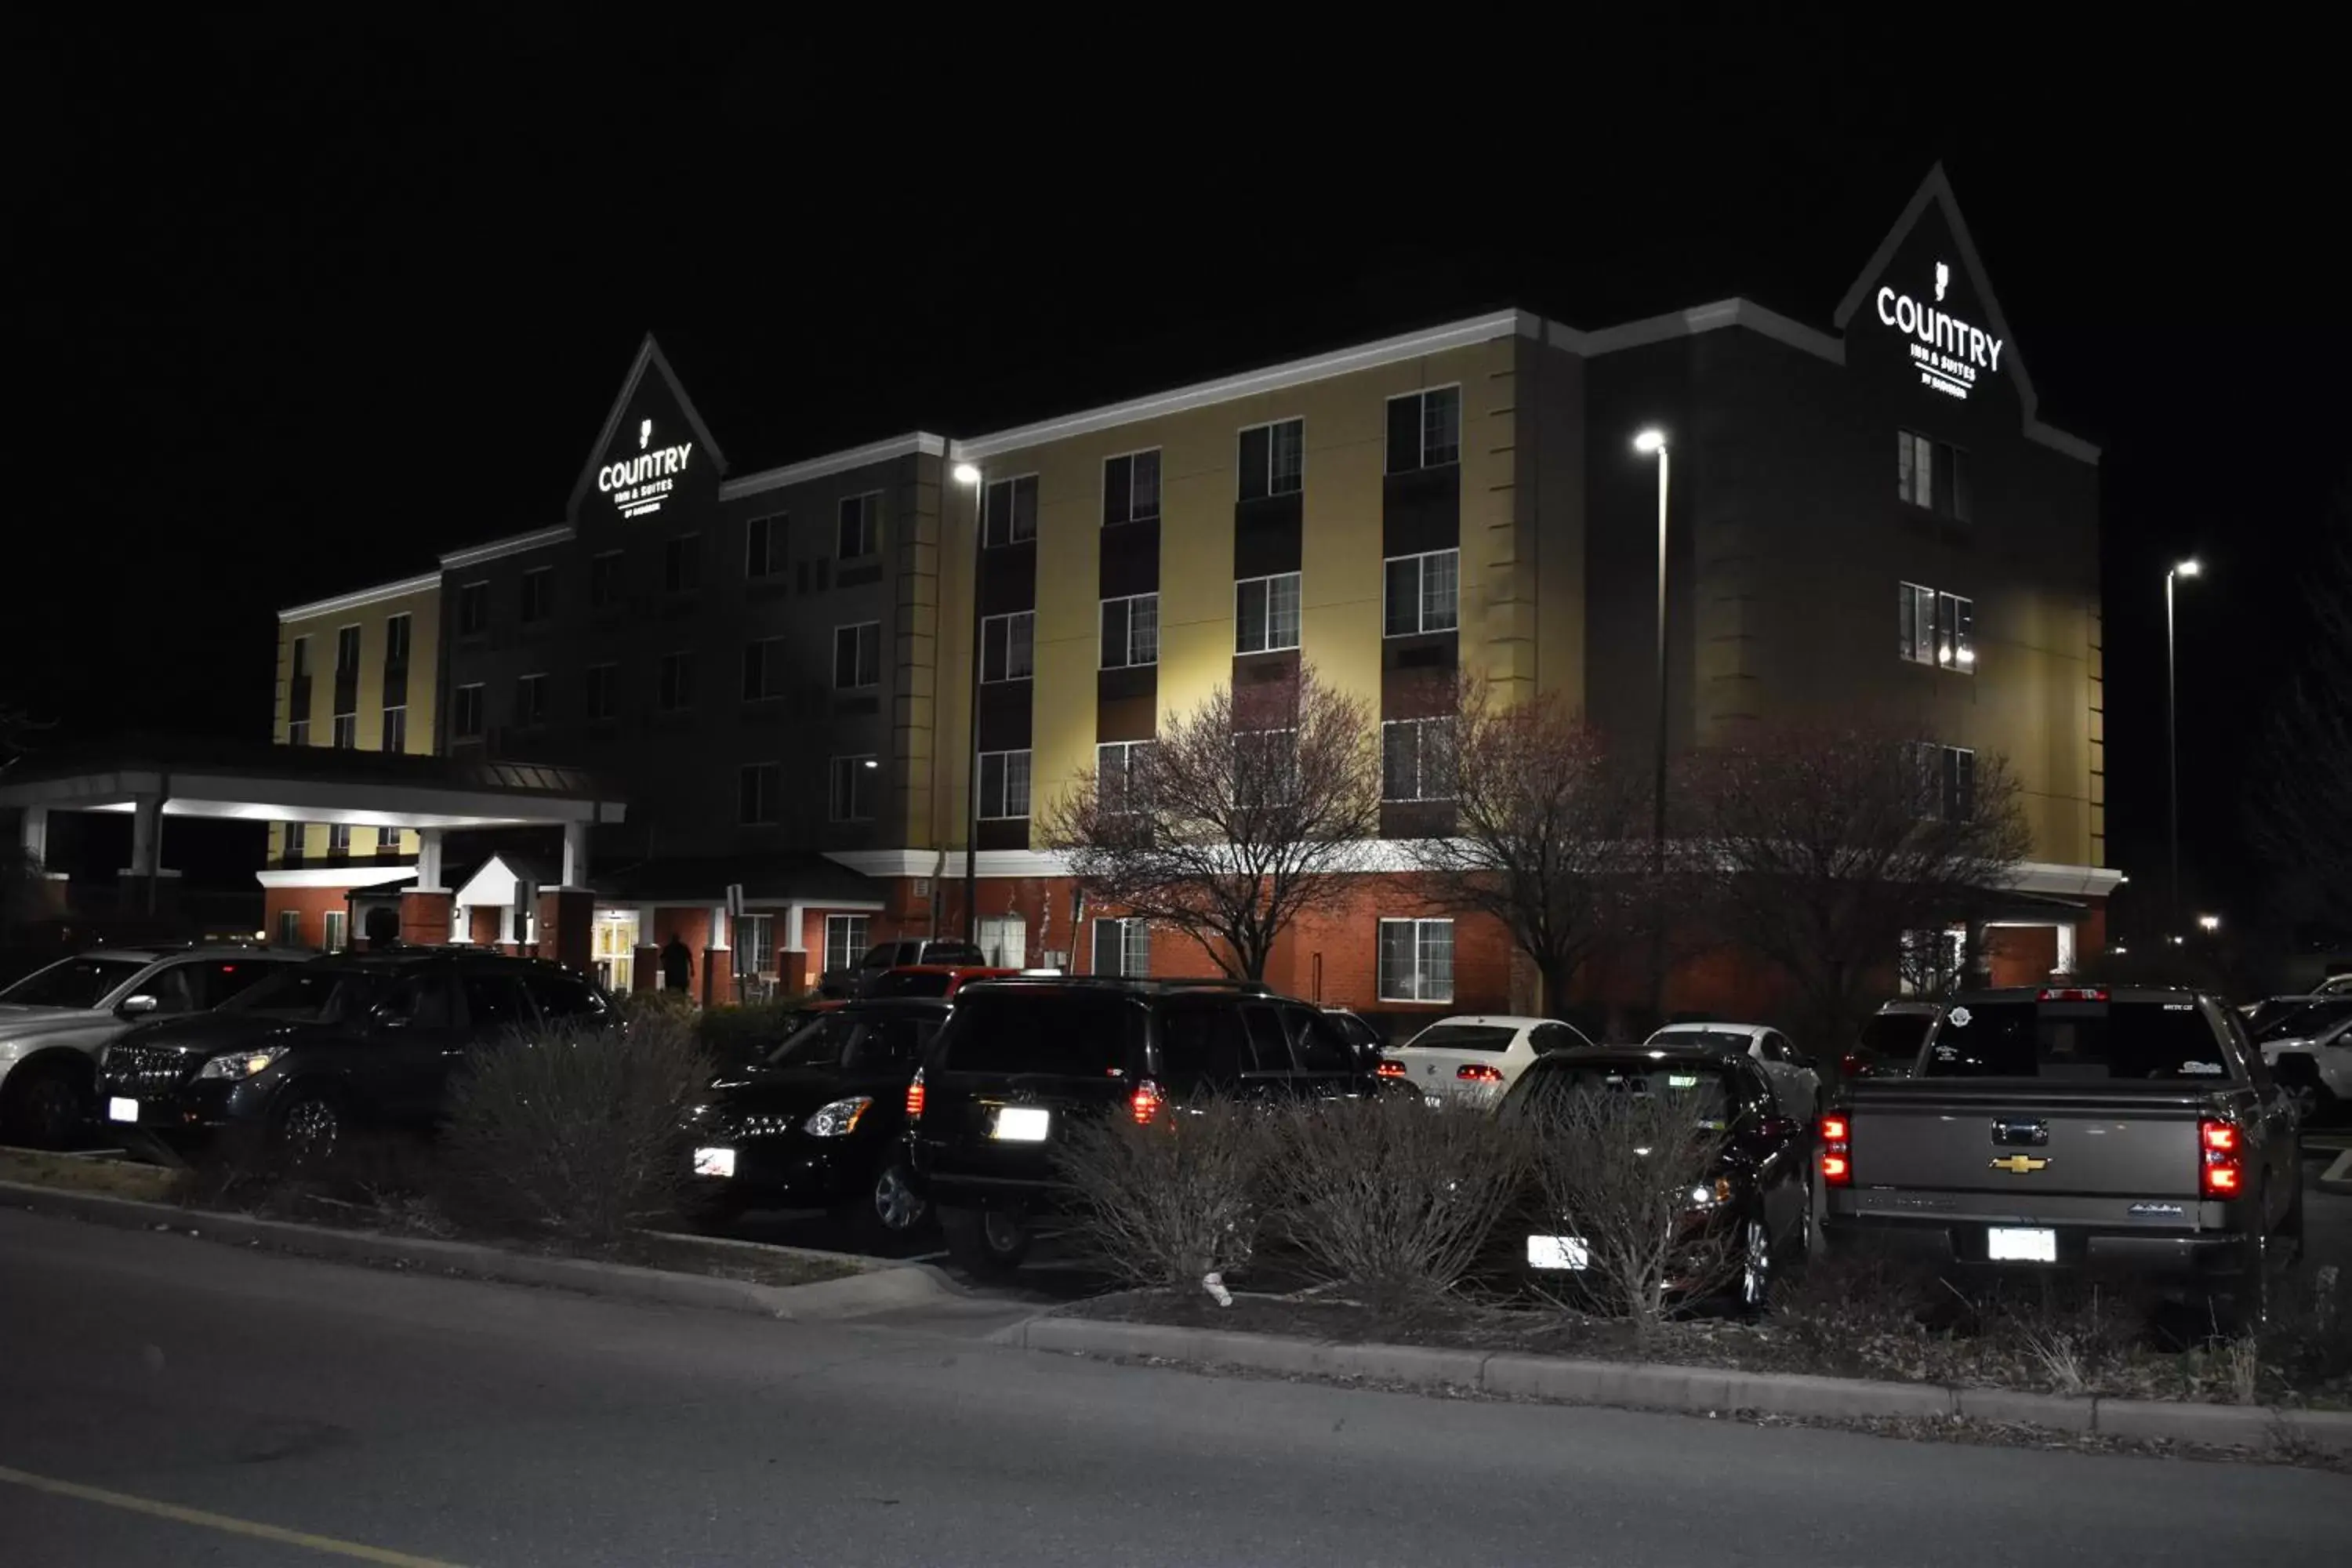 Property Building in Country Inn & Suites by Radisson, Hagerstown, MD